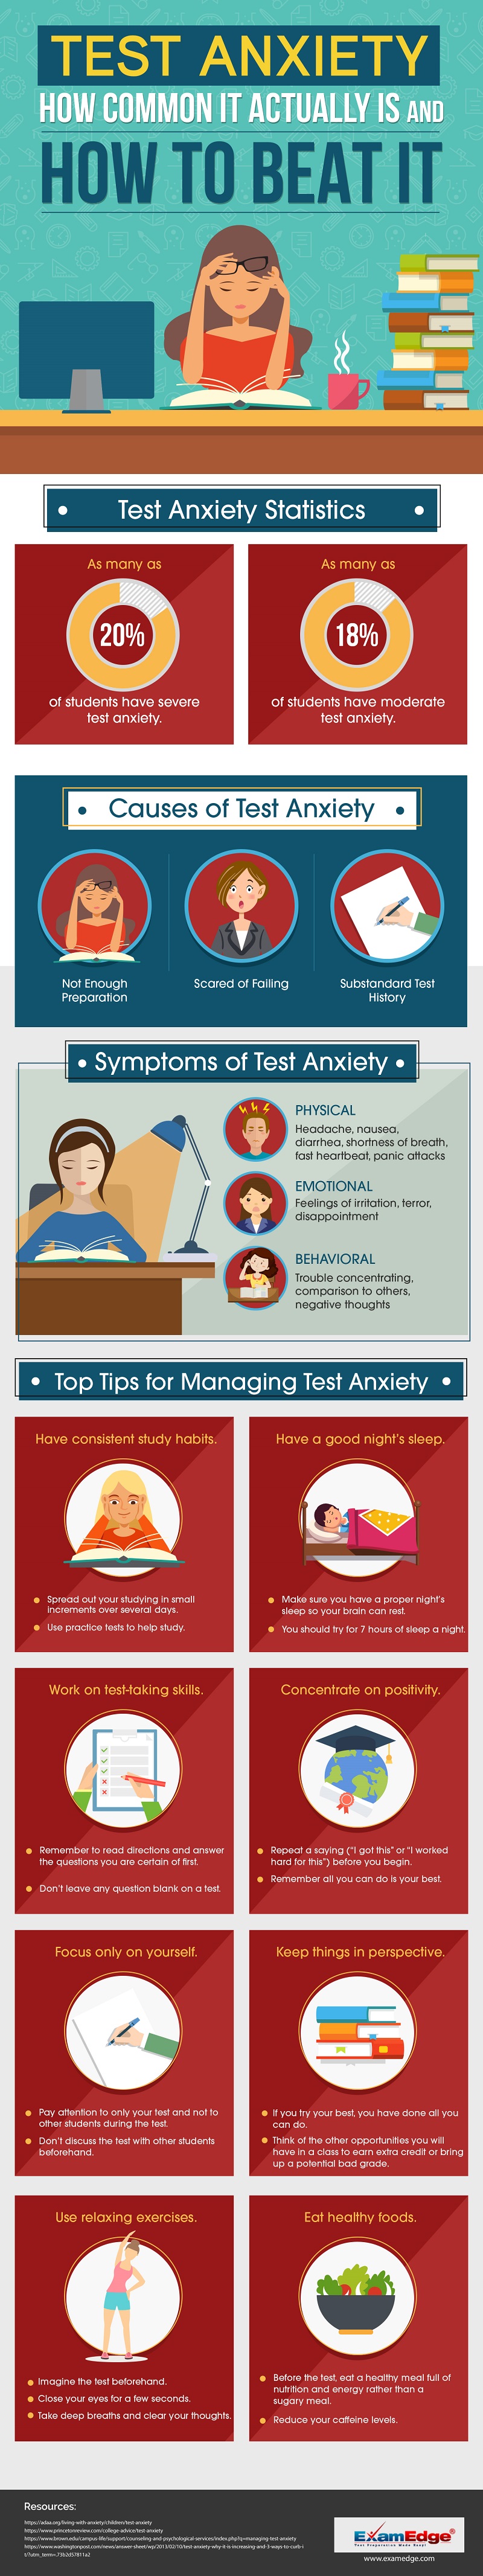 Test Anxiety Introduction